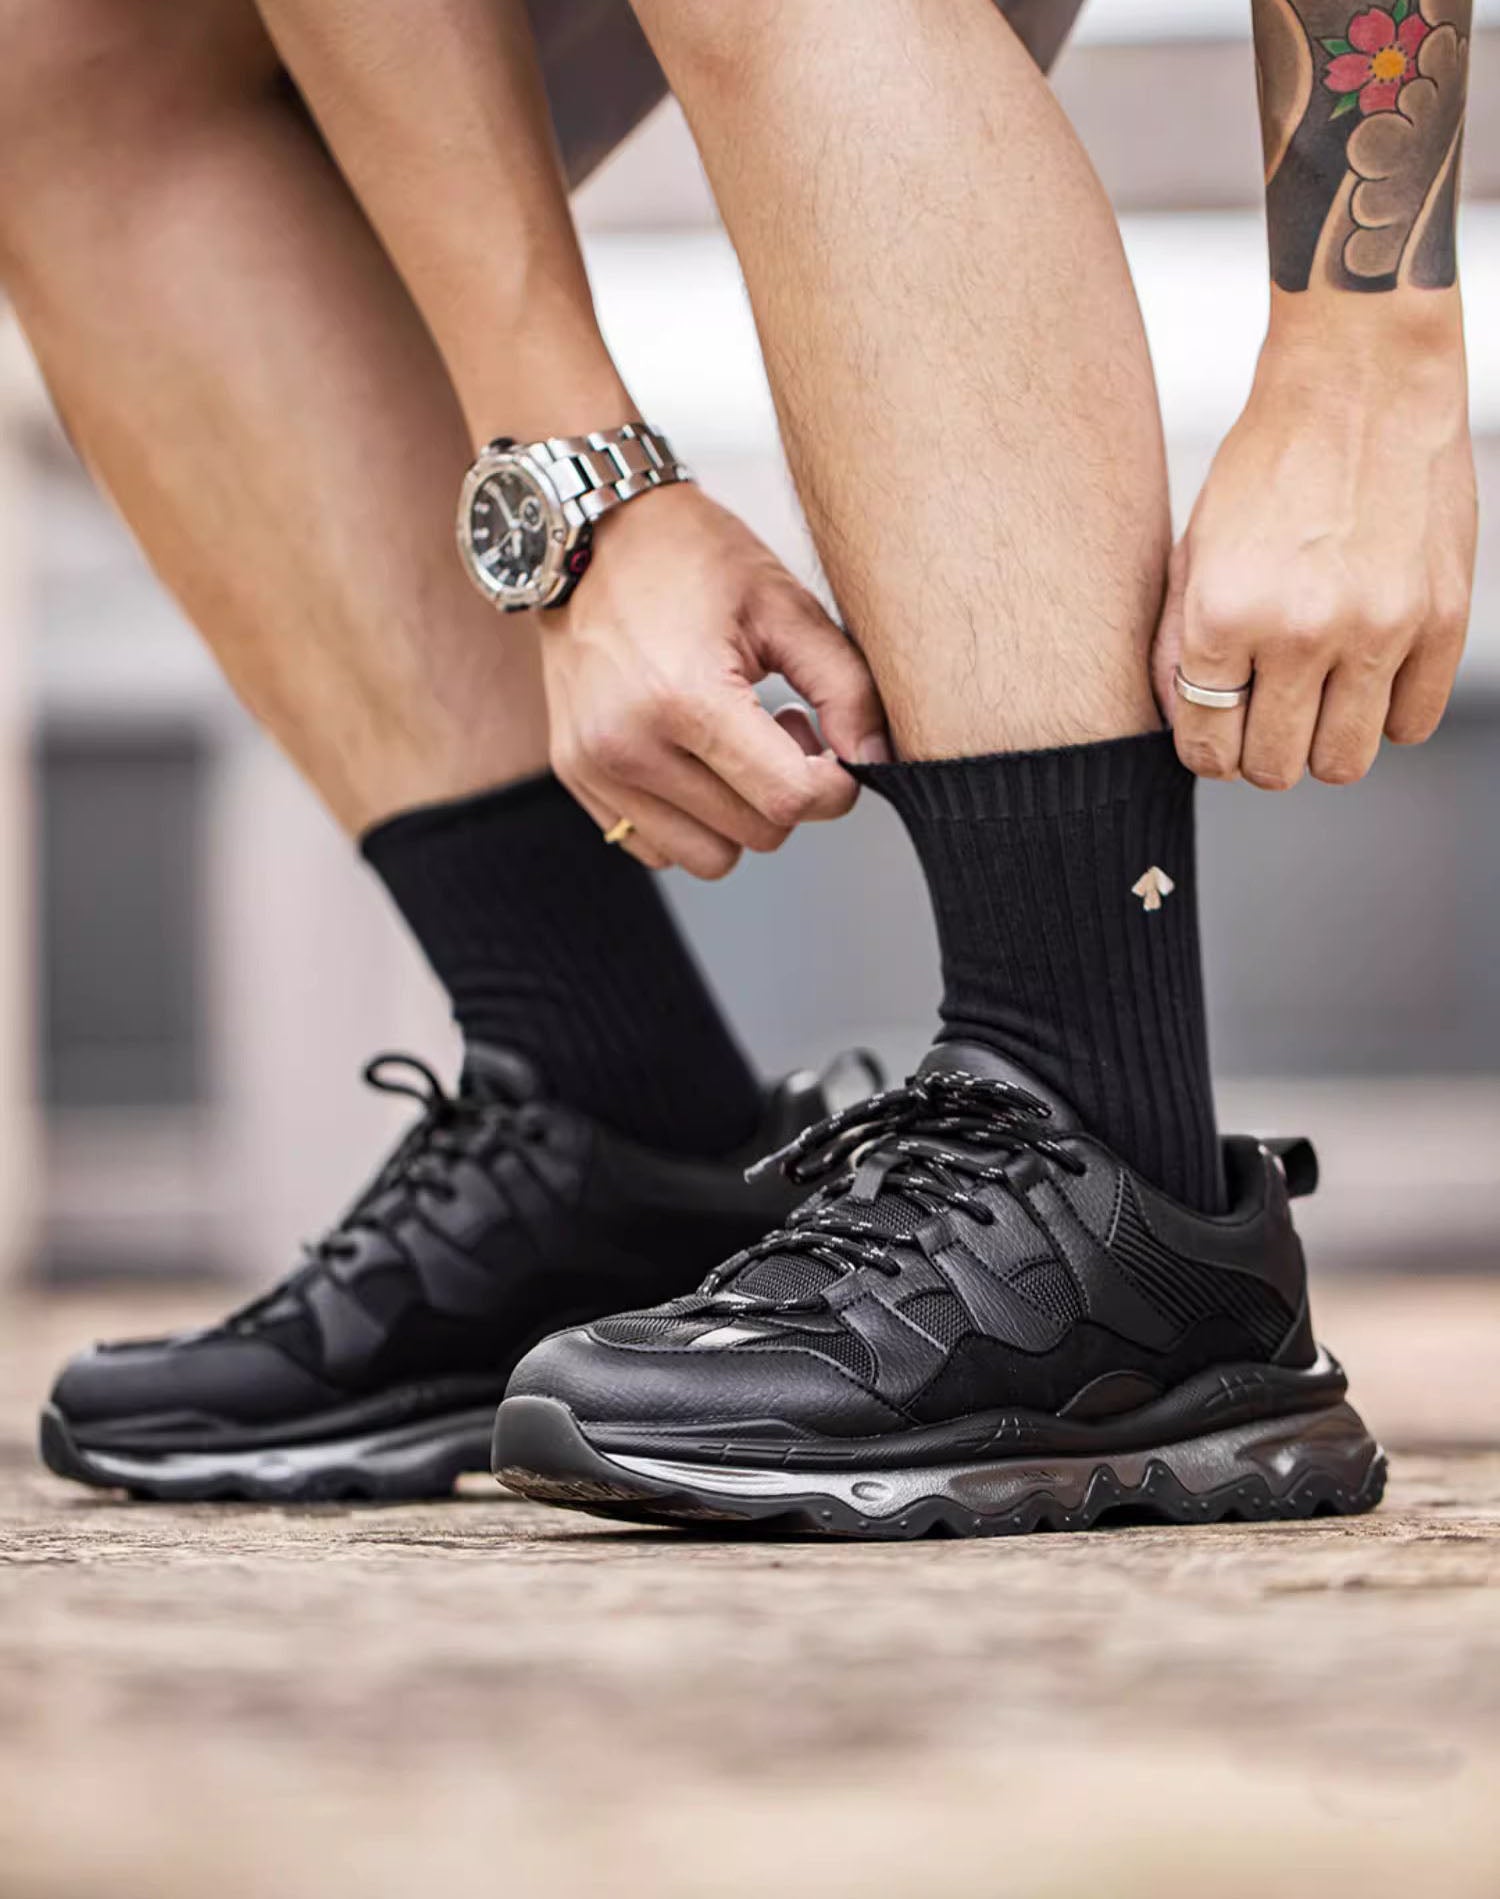 Jogging Black Warrior Thick-Soled Functional Men's Sports Shoes - Harmony Gallery